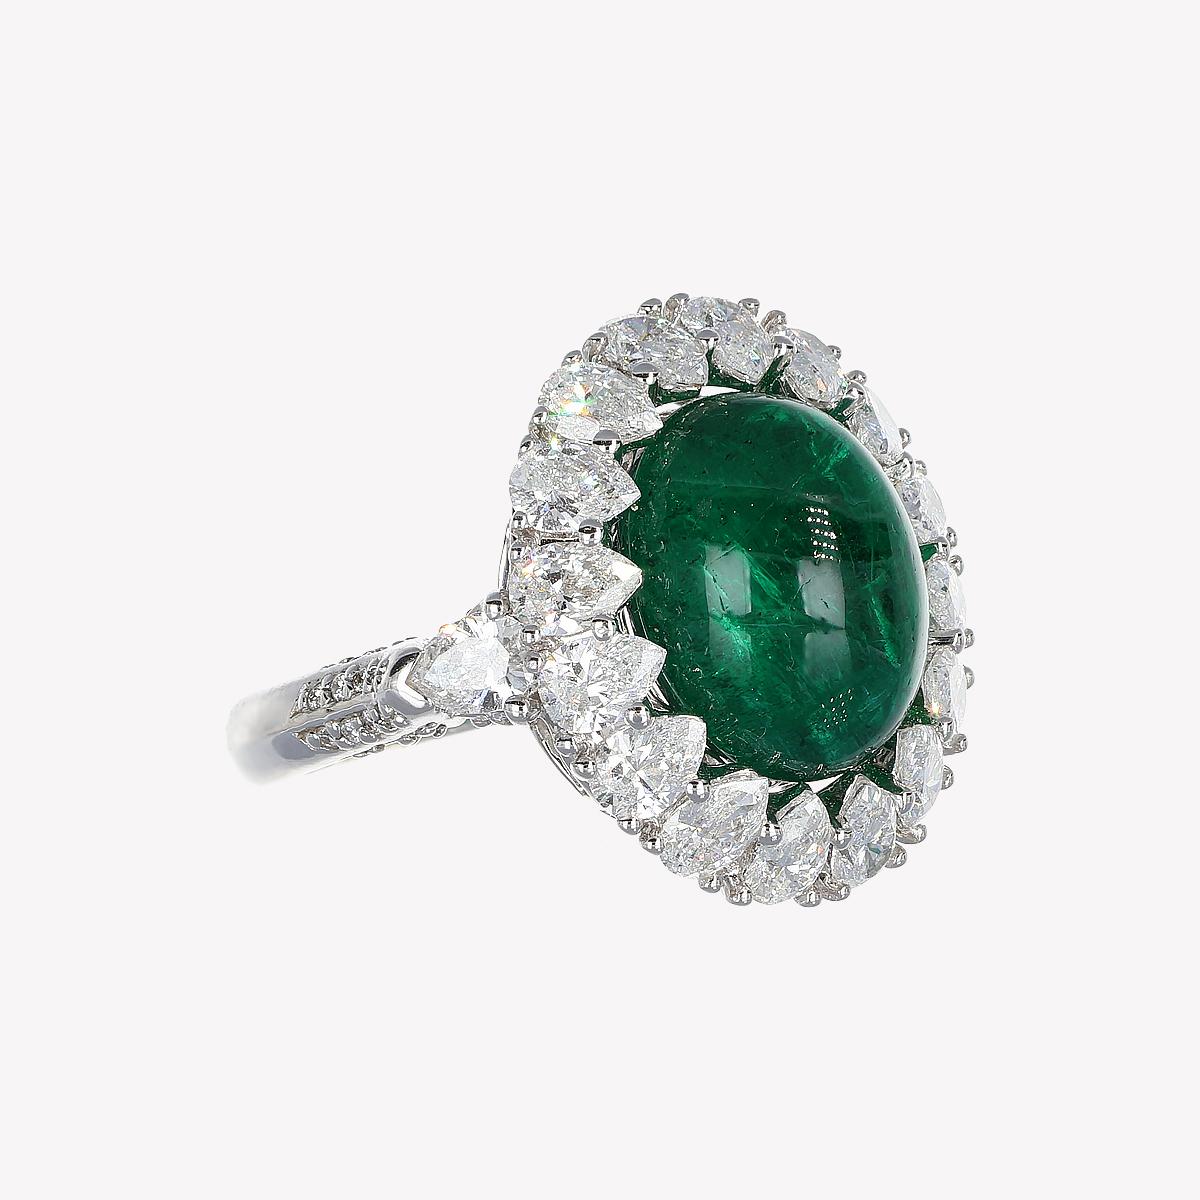 This ring is a hymn to nature and its pristine beauty, a jewel capturing the vibrant essence of life. The deep green of the cabochon emerald, hailing from the fertile lands of Zambia, shines like the heart of an ancient forest, promising prosperity